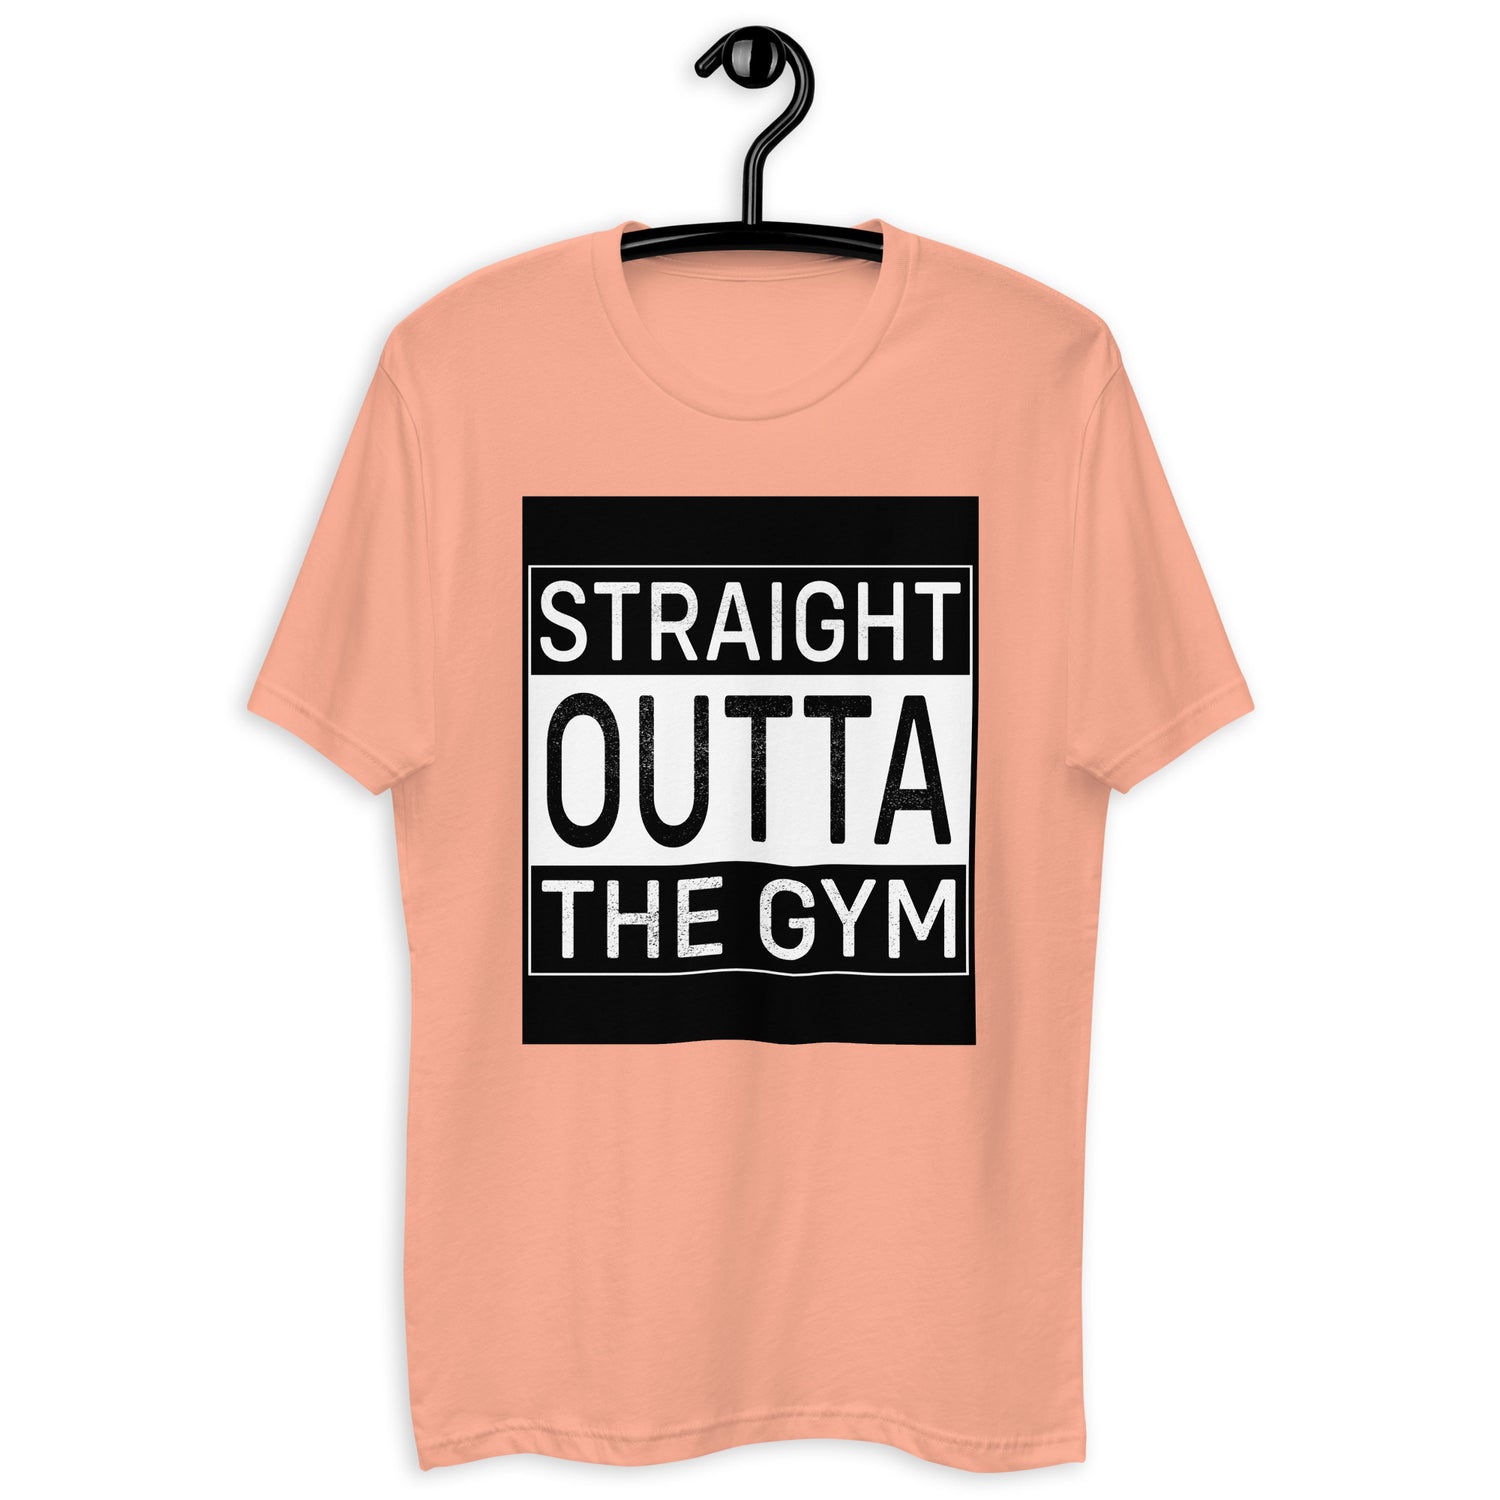 Sparkle-kiss-creations-straight-out-of-the-gym-t-shirt-peach